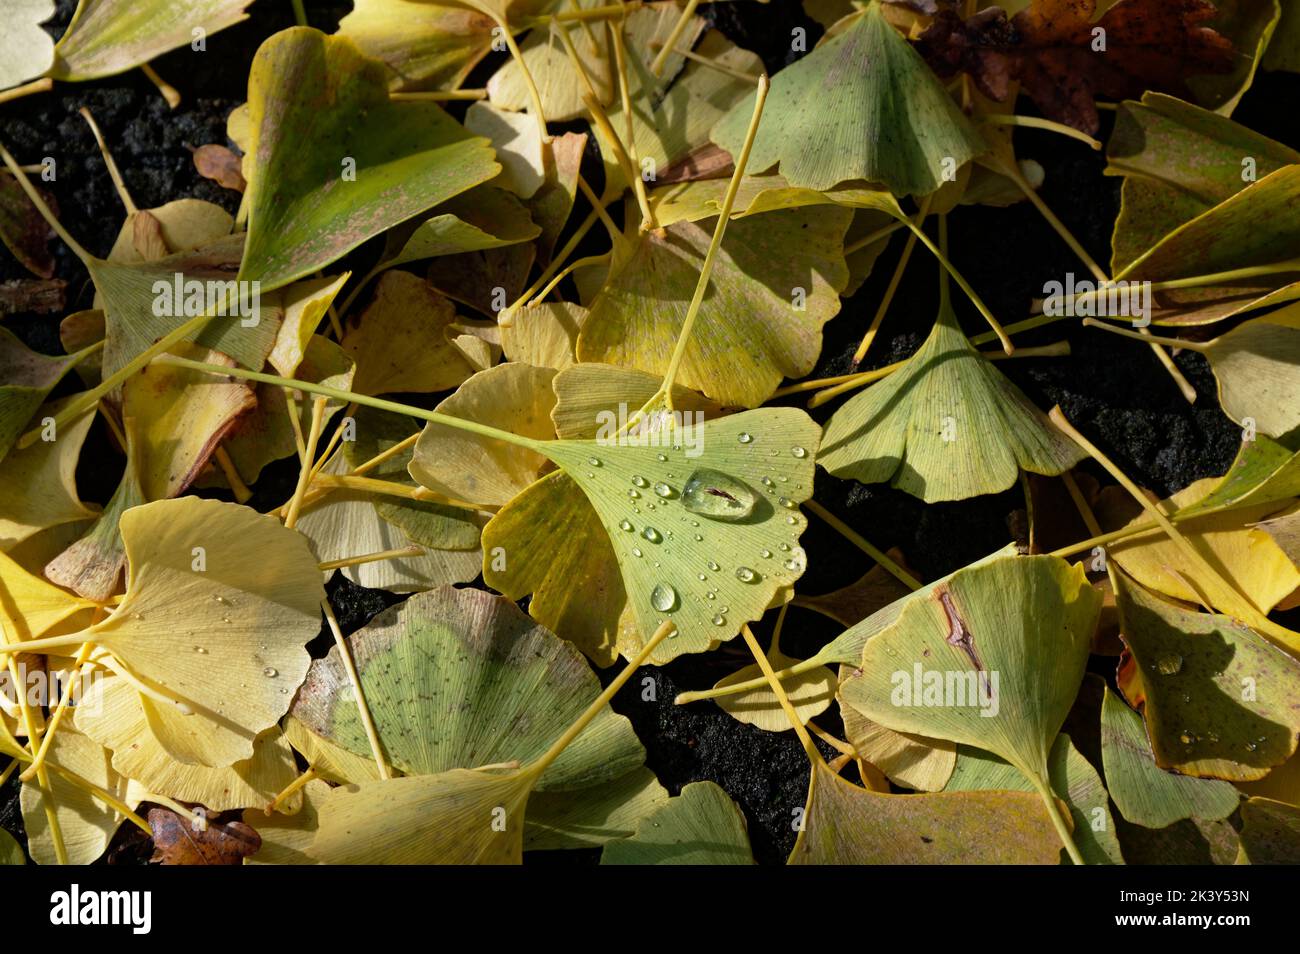 Ginko leaves have fallen off a tree and are in a pile Stock Photo